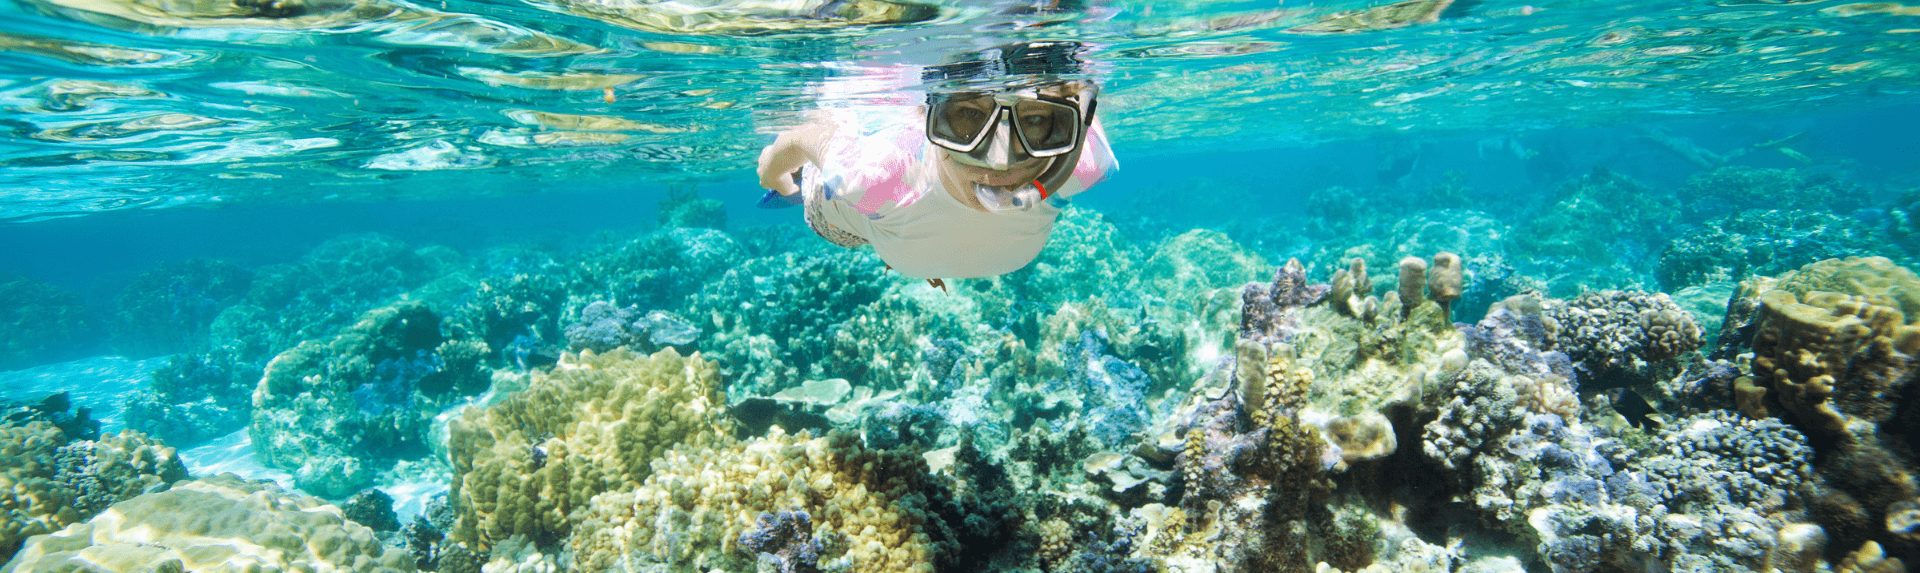 Top 3 locations for Great Barrier Reef snorkelling